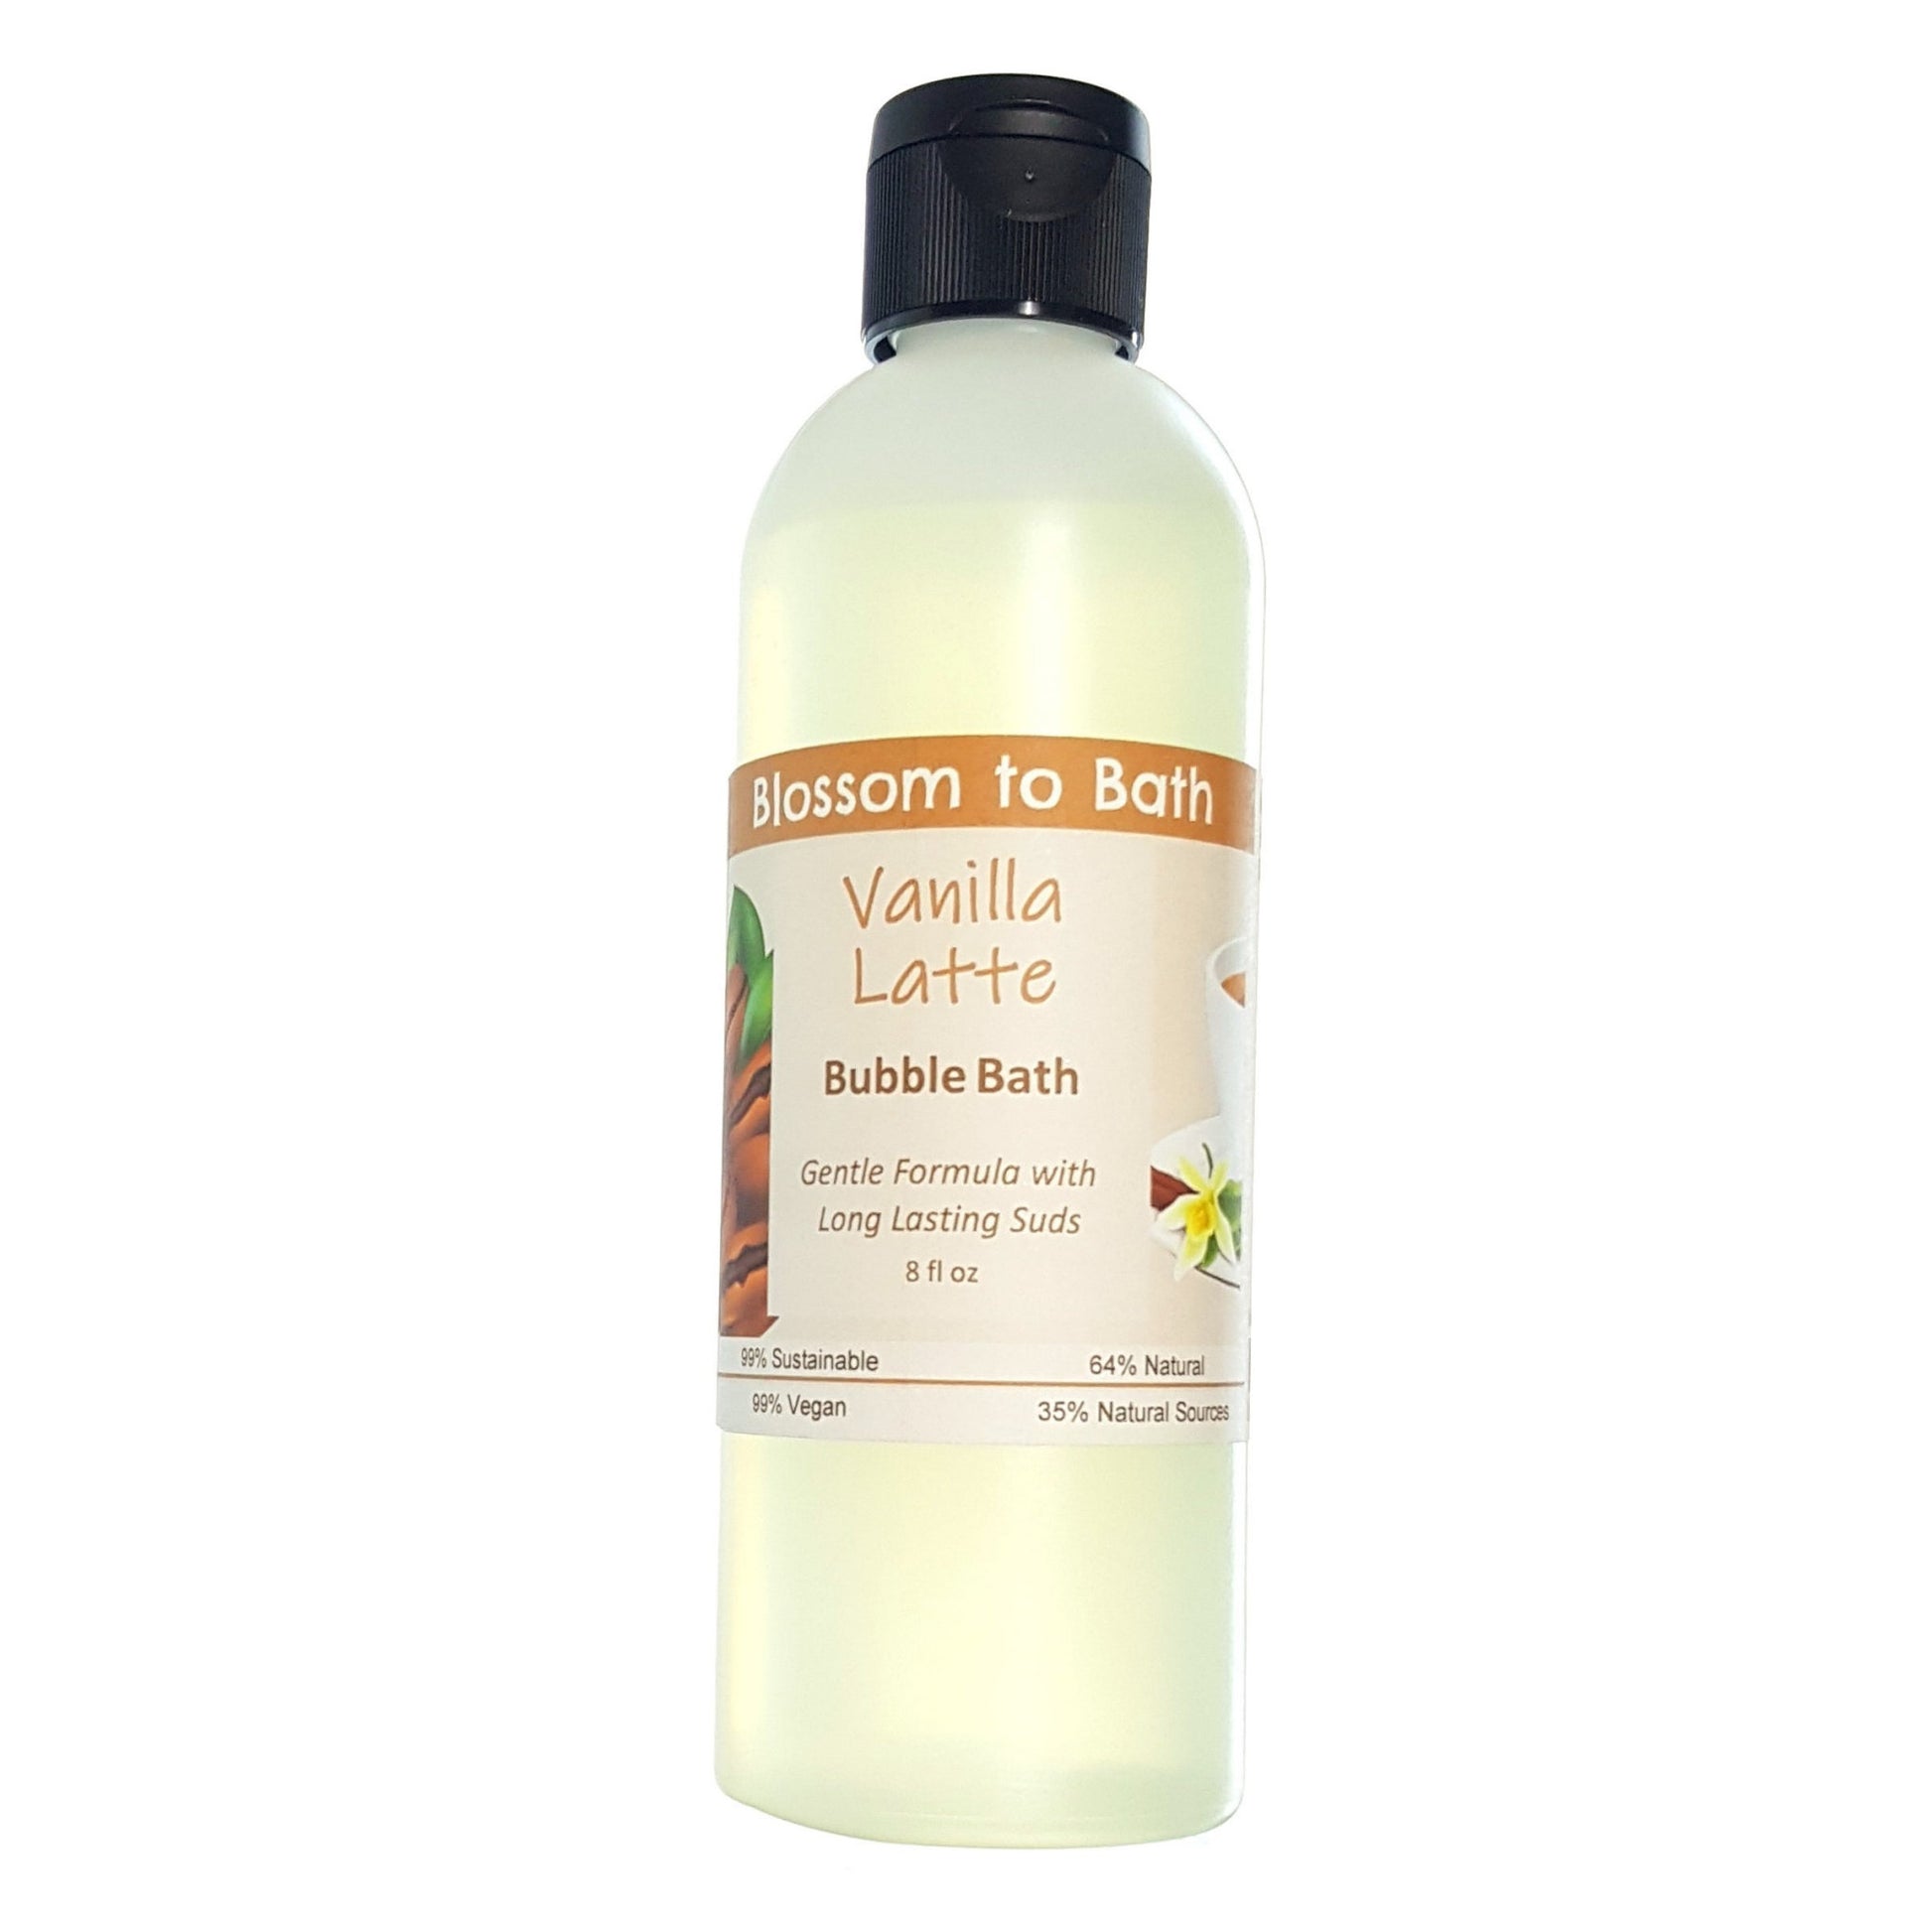 Buy Blossom to Bath Vanilla Latte Bubble Bath from Flowersong Soap Studio.  Lively, long lasting  bubbles in a gentle plant based formula for maximum relaxation time  Sweetened vanilla combines with rich coffee to form the classic latte scent.